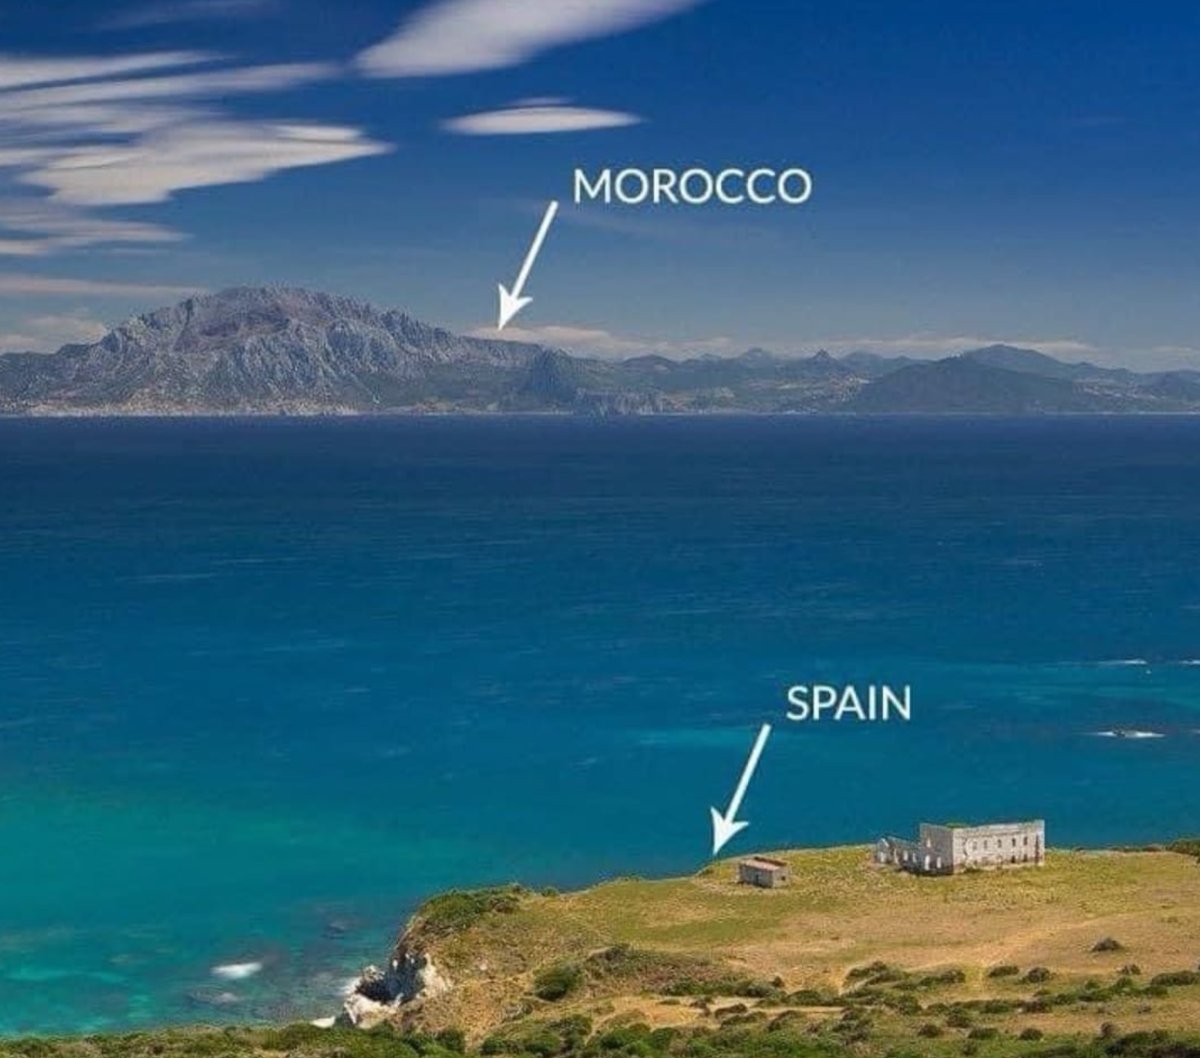 The shortest point between Morocco and Spain is just 9 miles